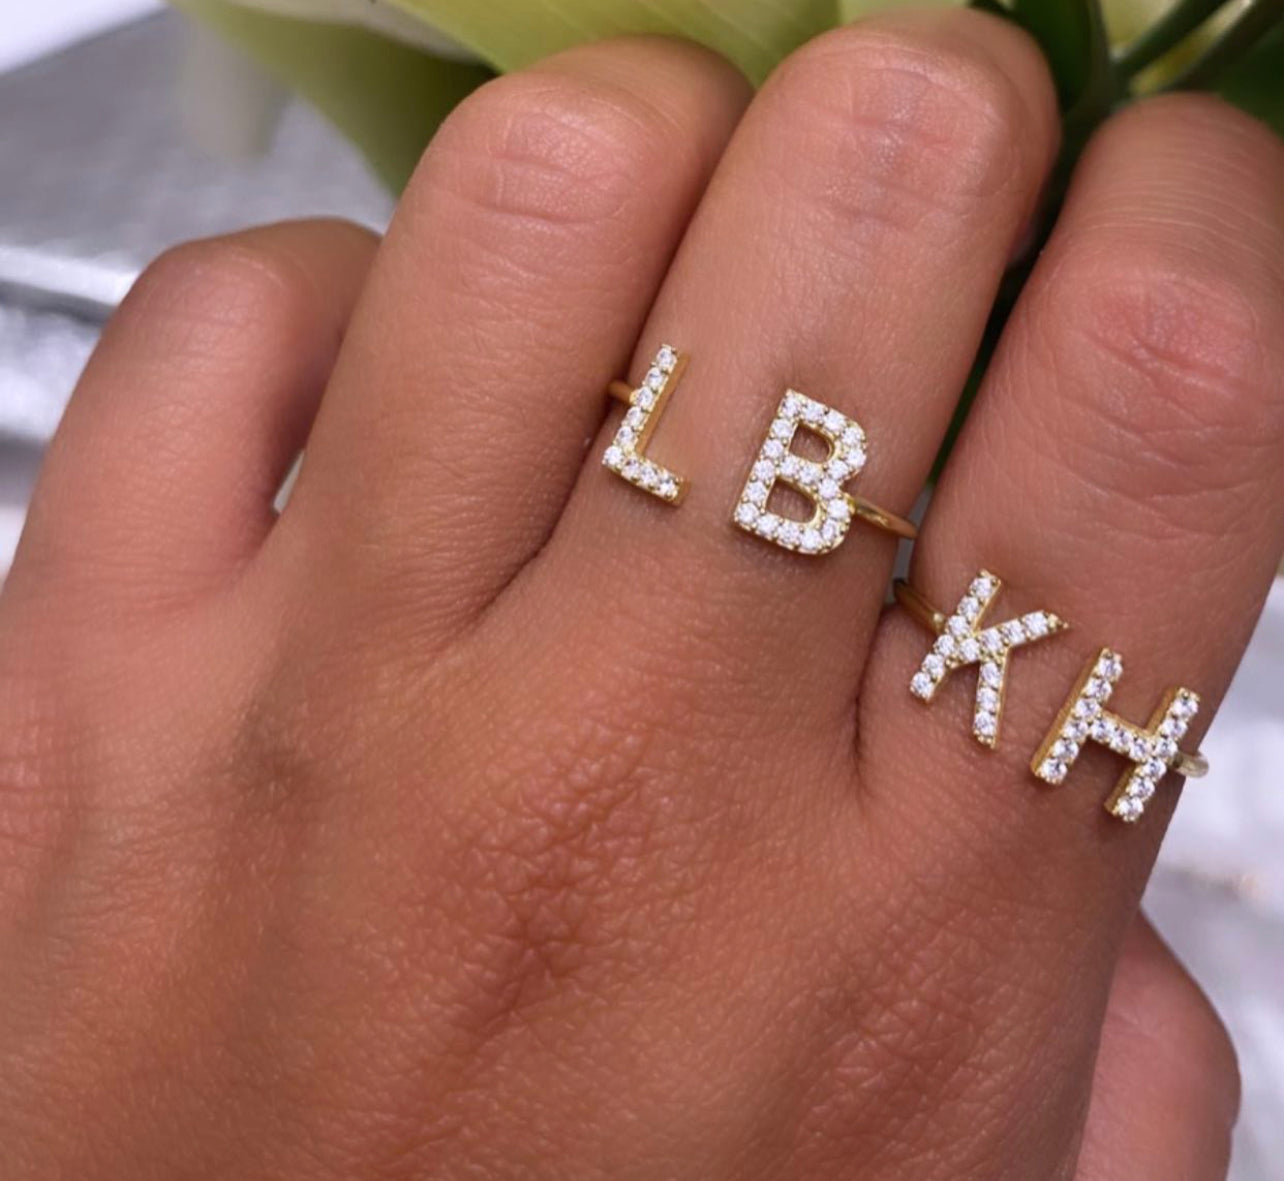 Customized Initial Ring